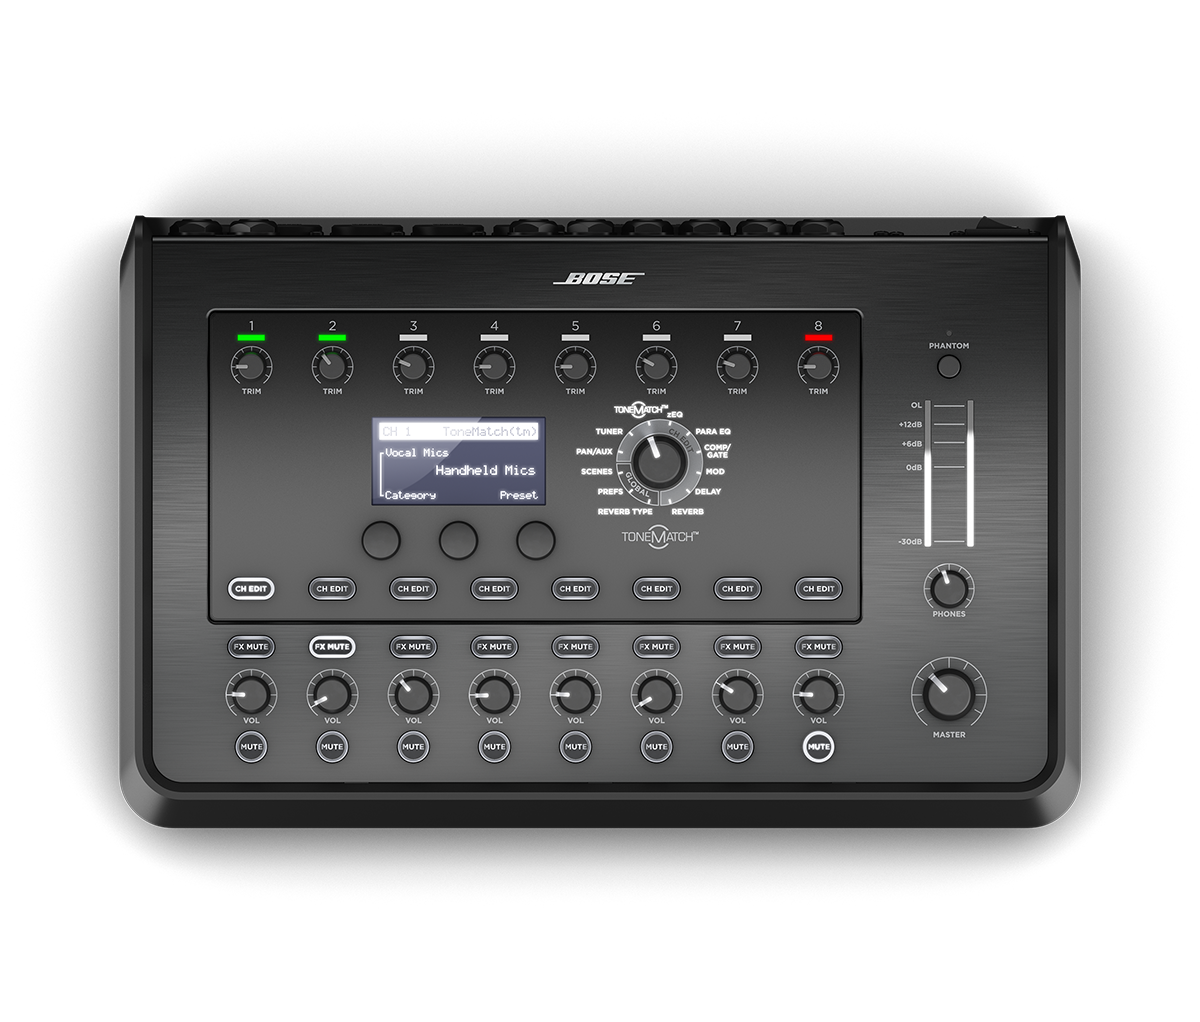 S1 Pro system - Bose Professional